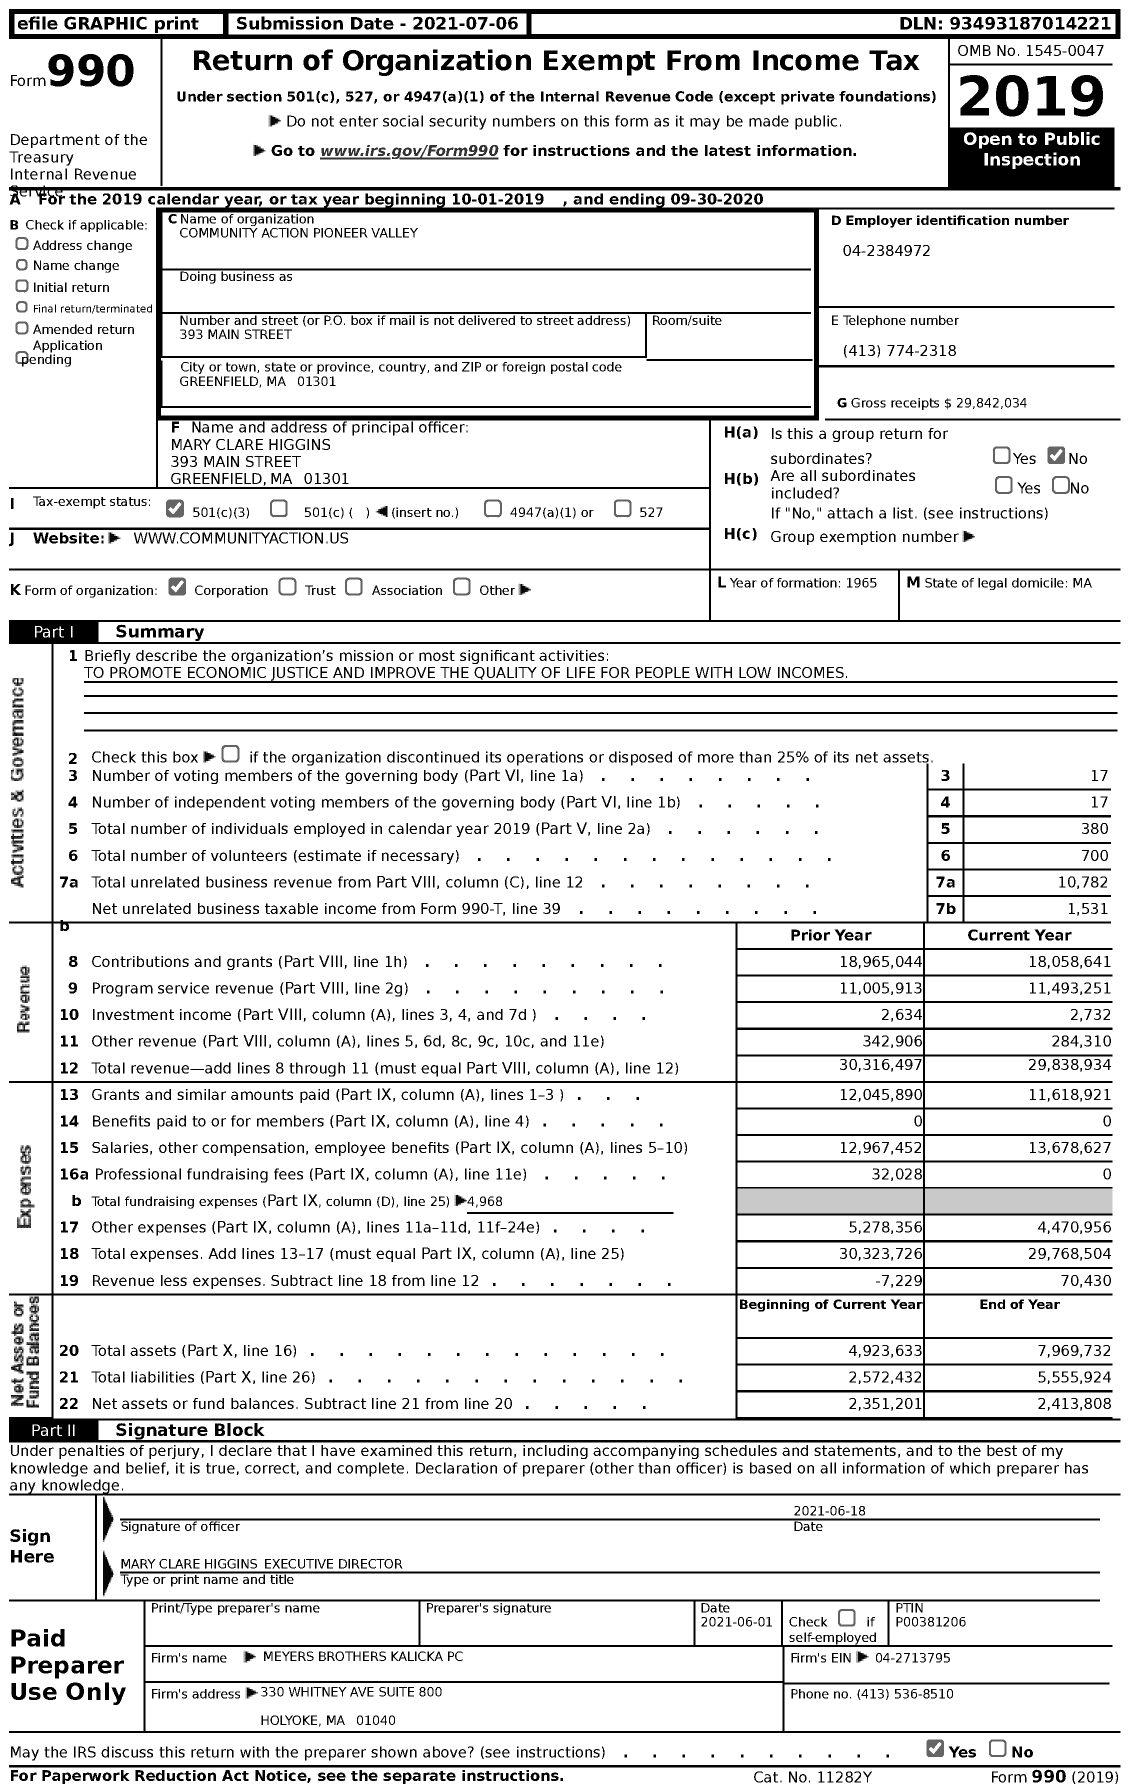 Image of first page of 2019 Form 990 for Community Action Pioneer Valley